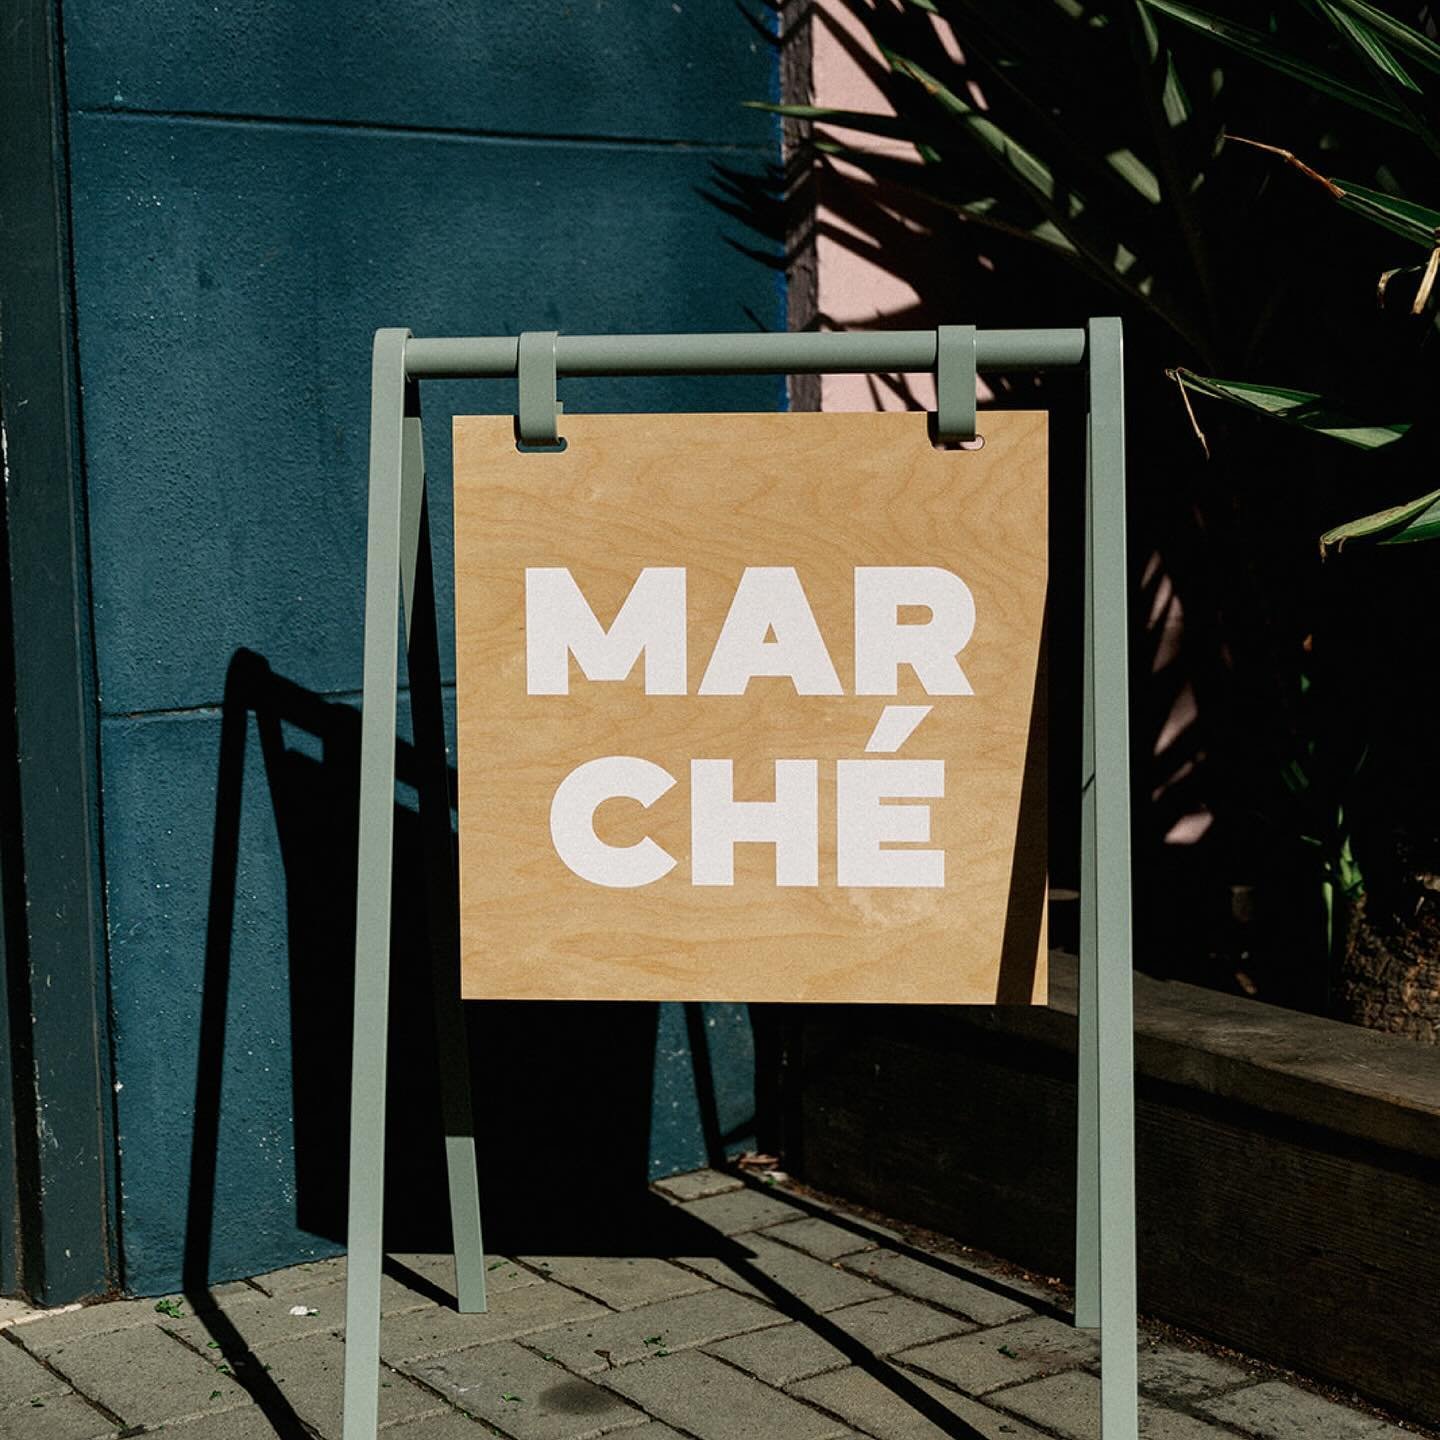 NEW WORK

We are excited to finally share the work we did with @marche.collective team last holiday season.

MARCH&Eacute; is an elevated shopping destination featuring women-owned and women-led brands, founded by the amazing @sarah_ewick &amp; @bets